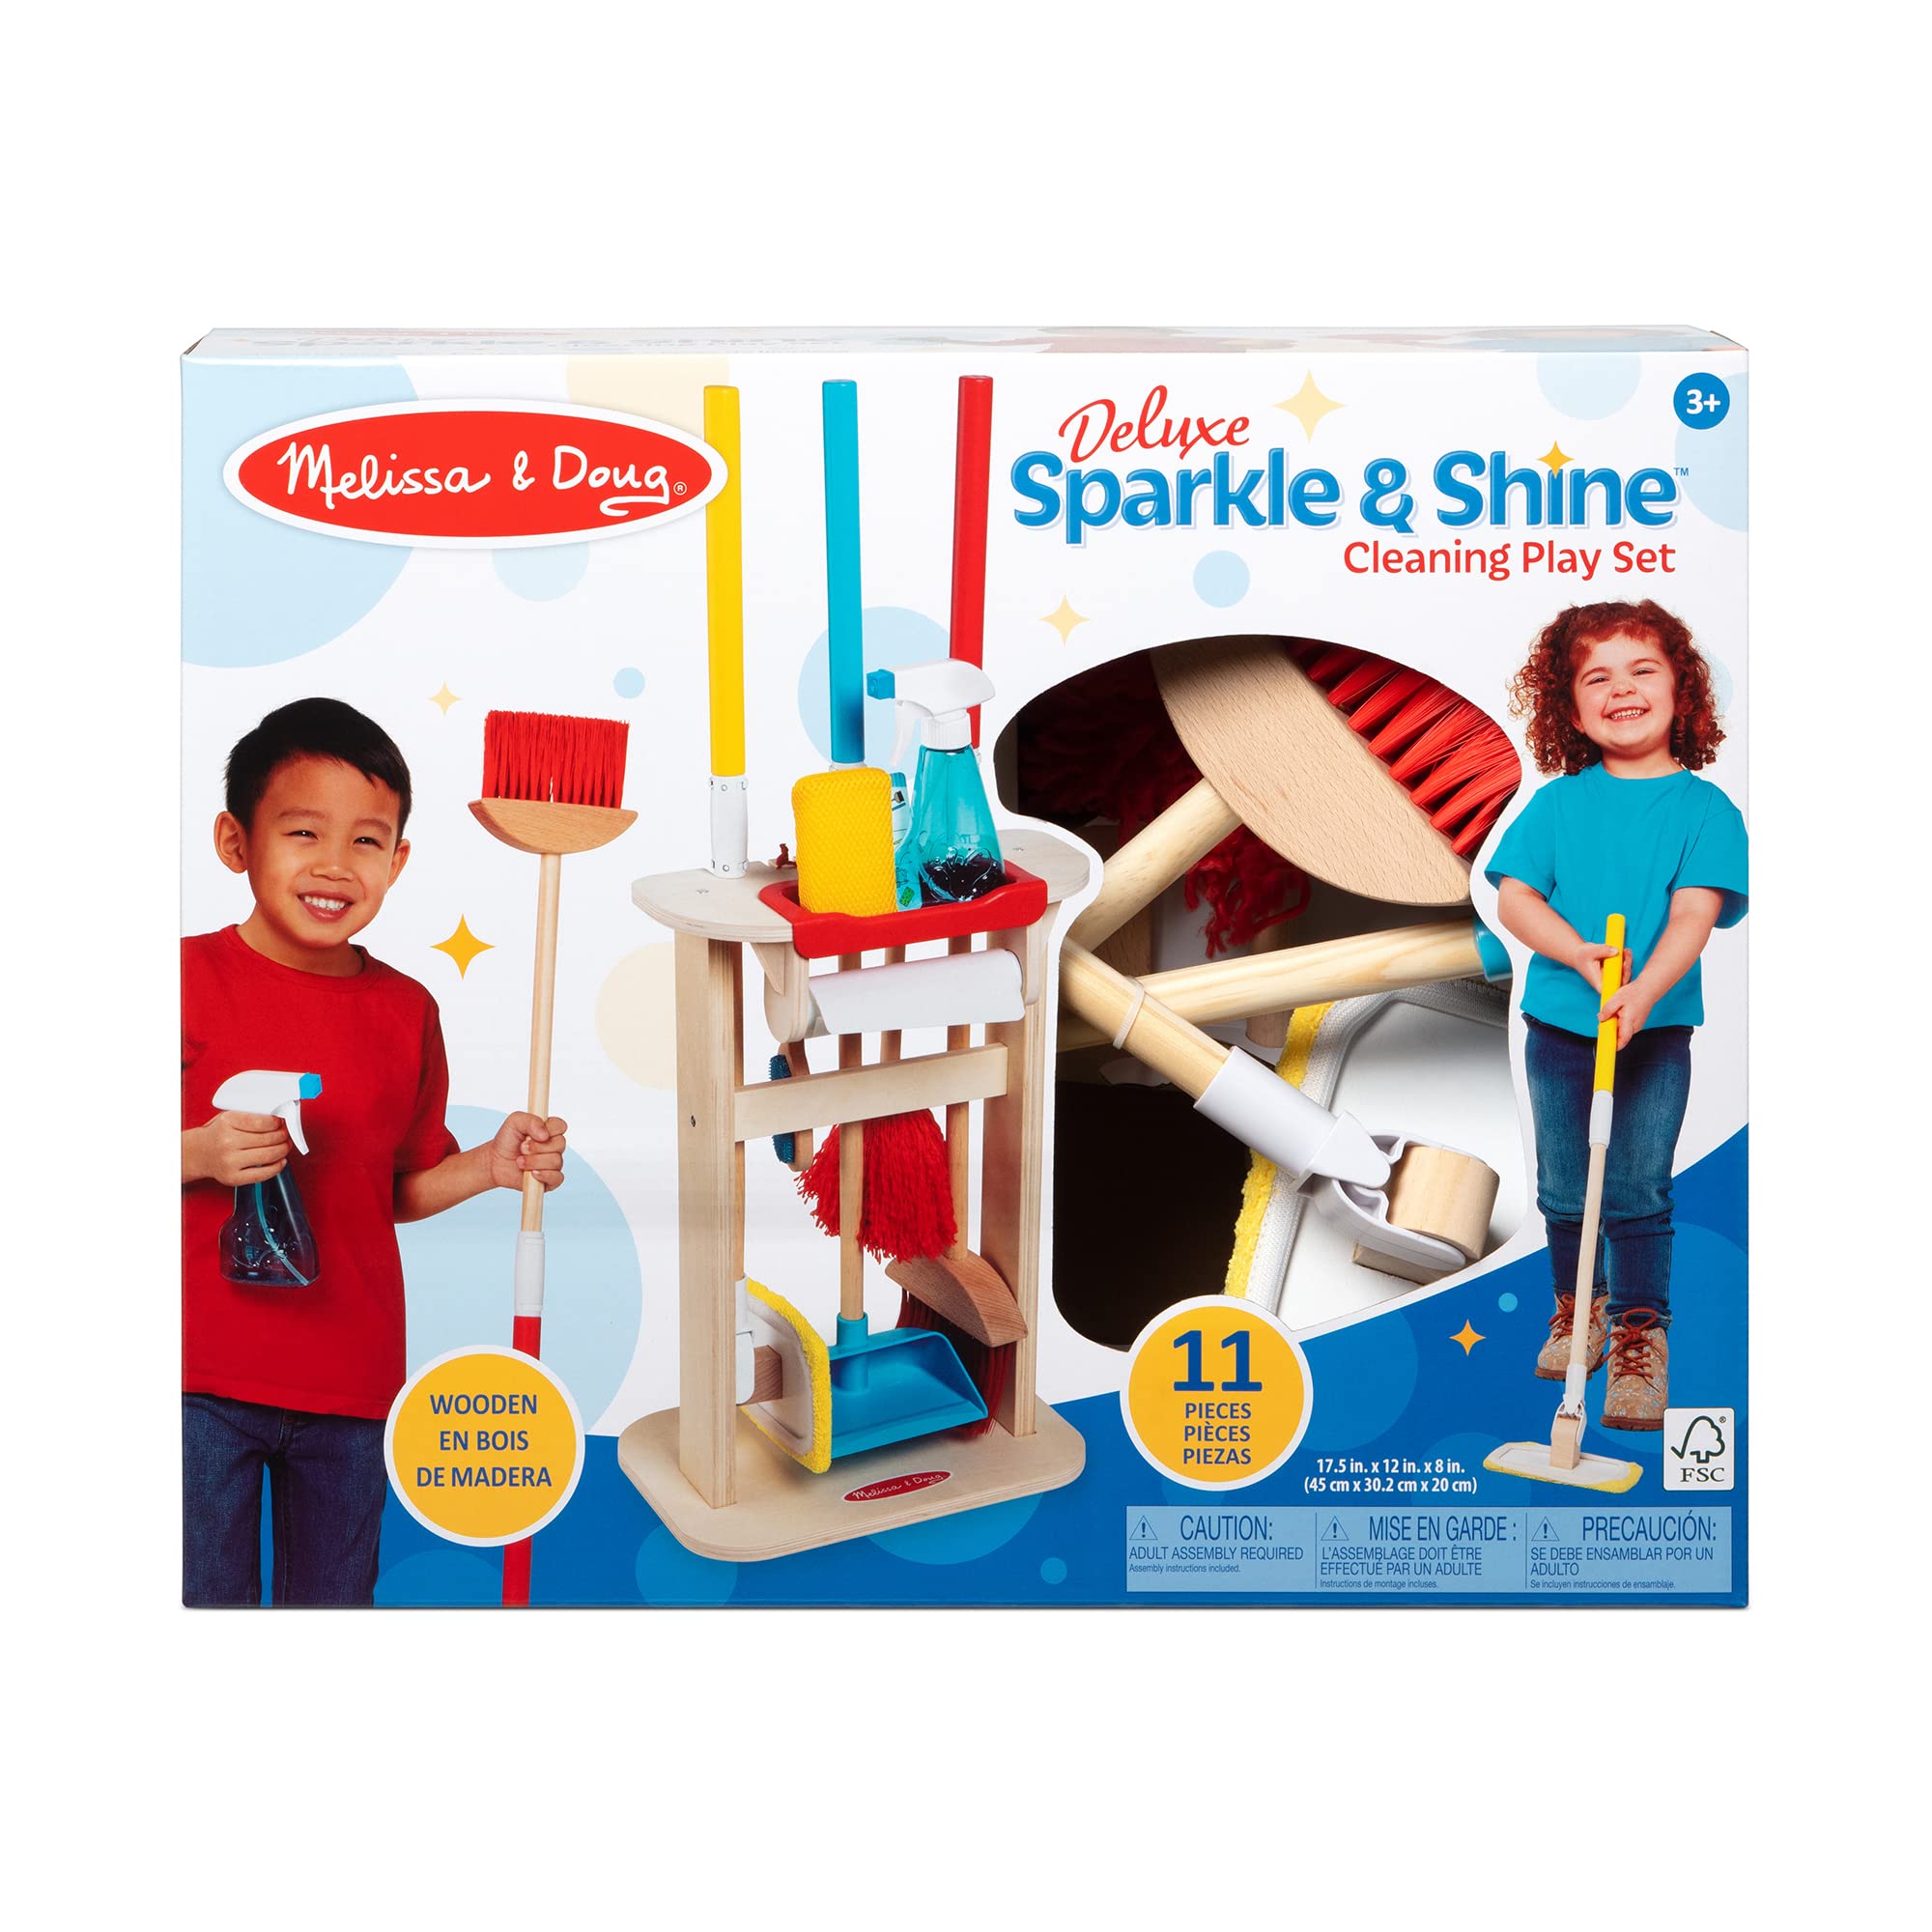 Melissa & Doug Deluxe Sparkle & Shine Cleaning Play Set (11 Pieces) - FSC-Certified Materials